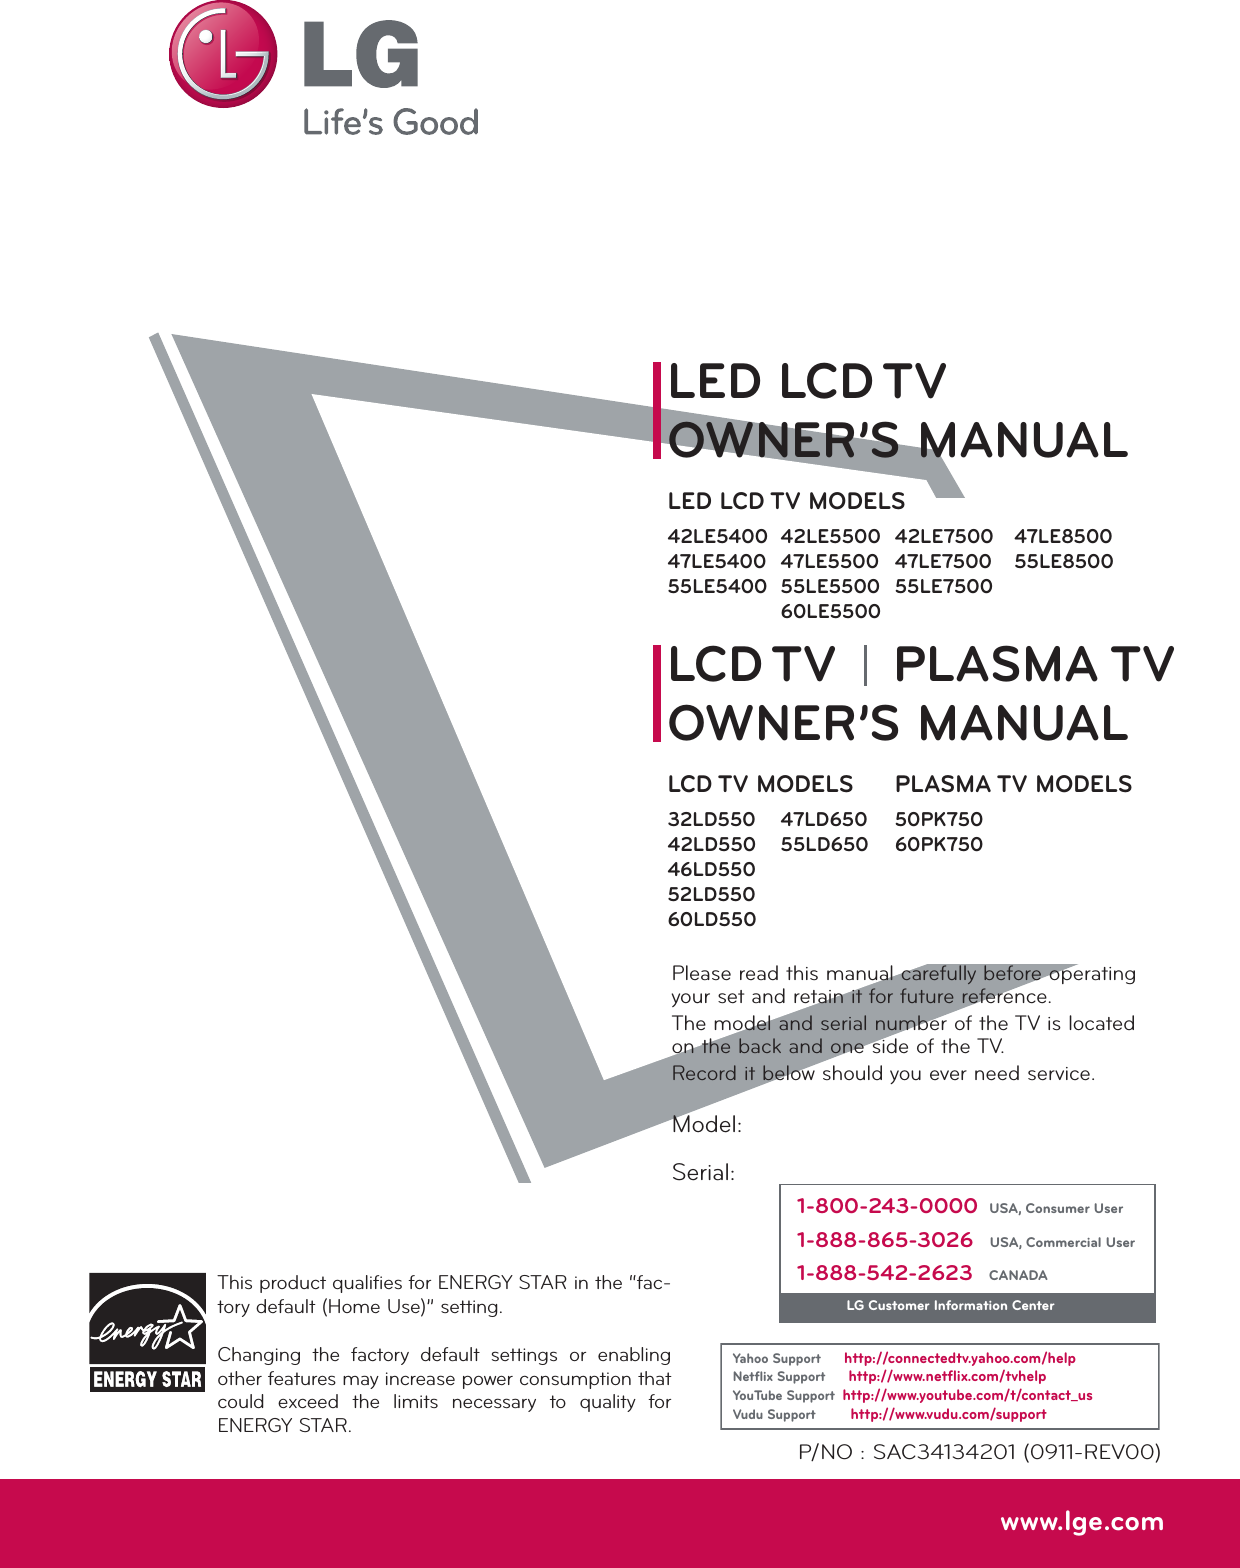 Please read this manual carefully before operating your set and retain it for future reference.The model and serial number of the TV is located on the back and one side of the TV. Record it below should you ever need service.P/NO : SAC34134201 (0911-REV00)www.lge.comThis product qualifies for ENERGY STAR in the “fac-tory default (Home Use)” setting.Changing  the  factory  default  settings  or  enabling other features may increase power consumption that could  exceed  the  limits  necessary  to  quality  for ENERGY STAR.Model:Serial:1-800-243-0000  USA, Consumer User1-888-865-3026   USA, Commercial User1-888-542-2623   CANADALG Customer Information CenterYahoo Support      http://connectedtv.yahoo.com/helpNetﬂix Support      http://www.netﬂix.com/tvhelpYouTube Support  http://www.youtube.com/t/contact_usVudu Support         http://www.vudu.com/supportLCD TVLED LCD TVPLASMA TVOWNER’S MANUALOWNER’S MANUALLCD TV MODELS32LD55042LD55046LD55052LD55060LD550LED LCD TV MODELS42LE540047LE540055LE540042LE550047LE550055LE550060LE550047LD65055LD65047LE850055LE8500PLASMA TV MODELS50PK75060PK75042LE750047LE750055LE7500